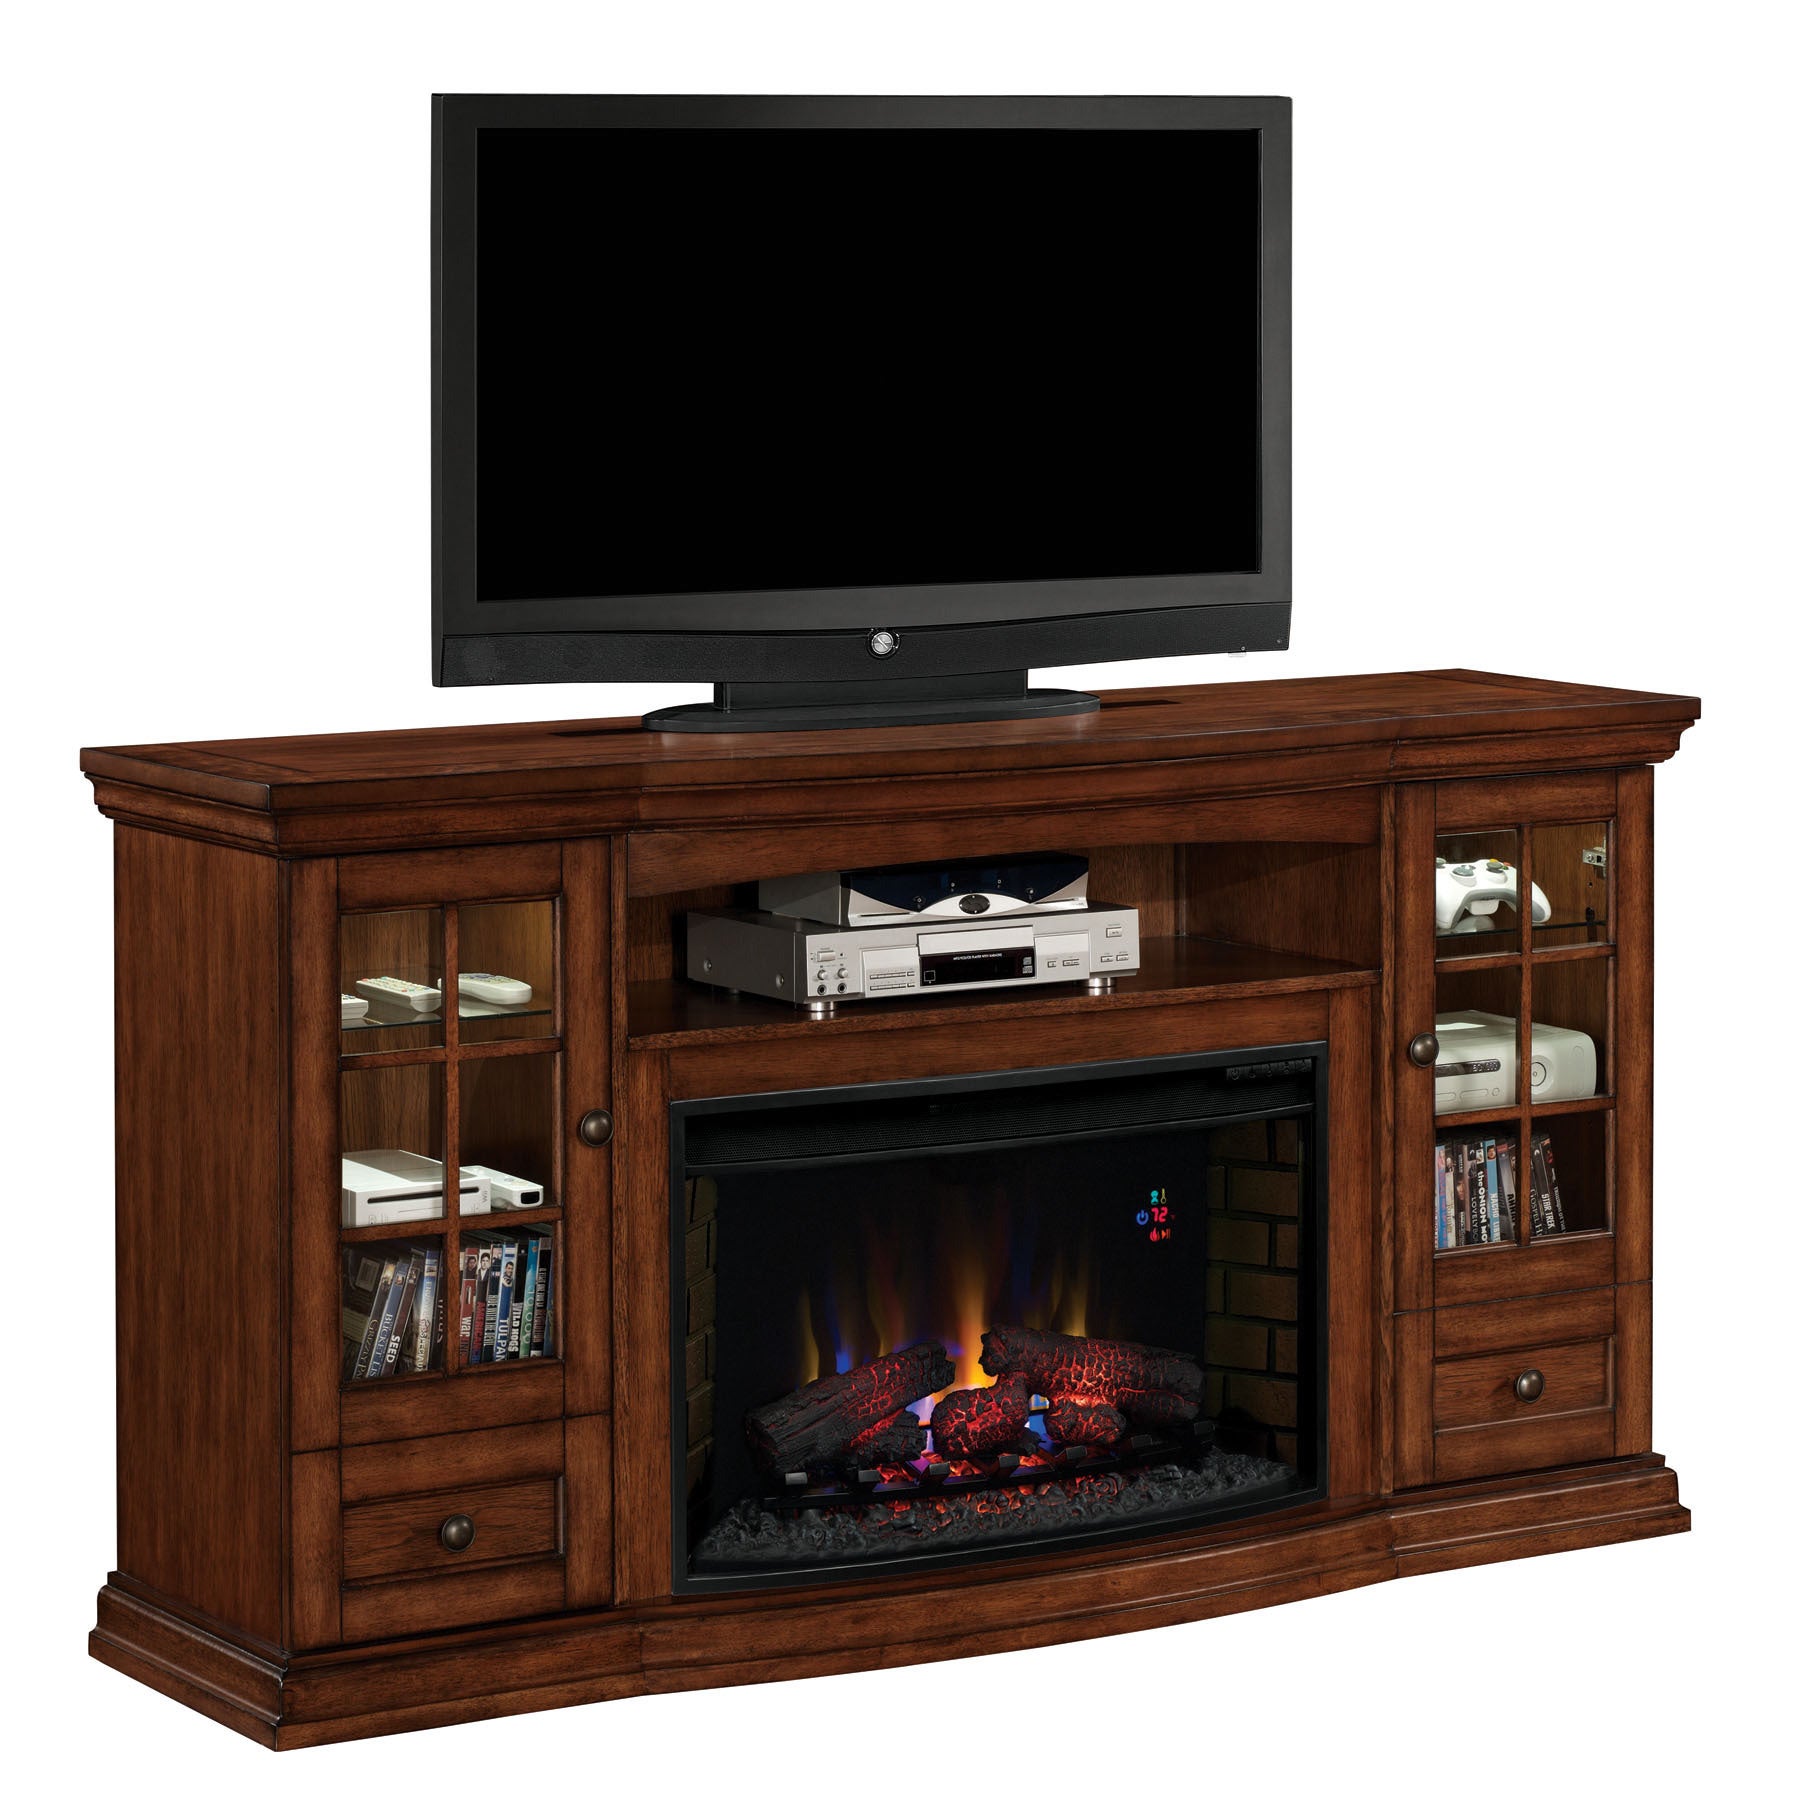 Farmhouse Entertainment Center with Fireplace Best Of Seagate Tv Stand with 32 Inch Curved Infrared Quartz Fireplace Pecan